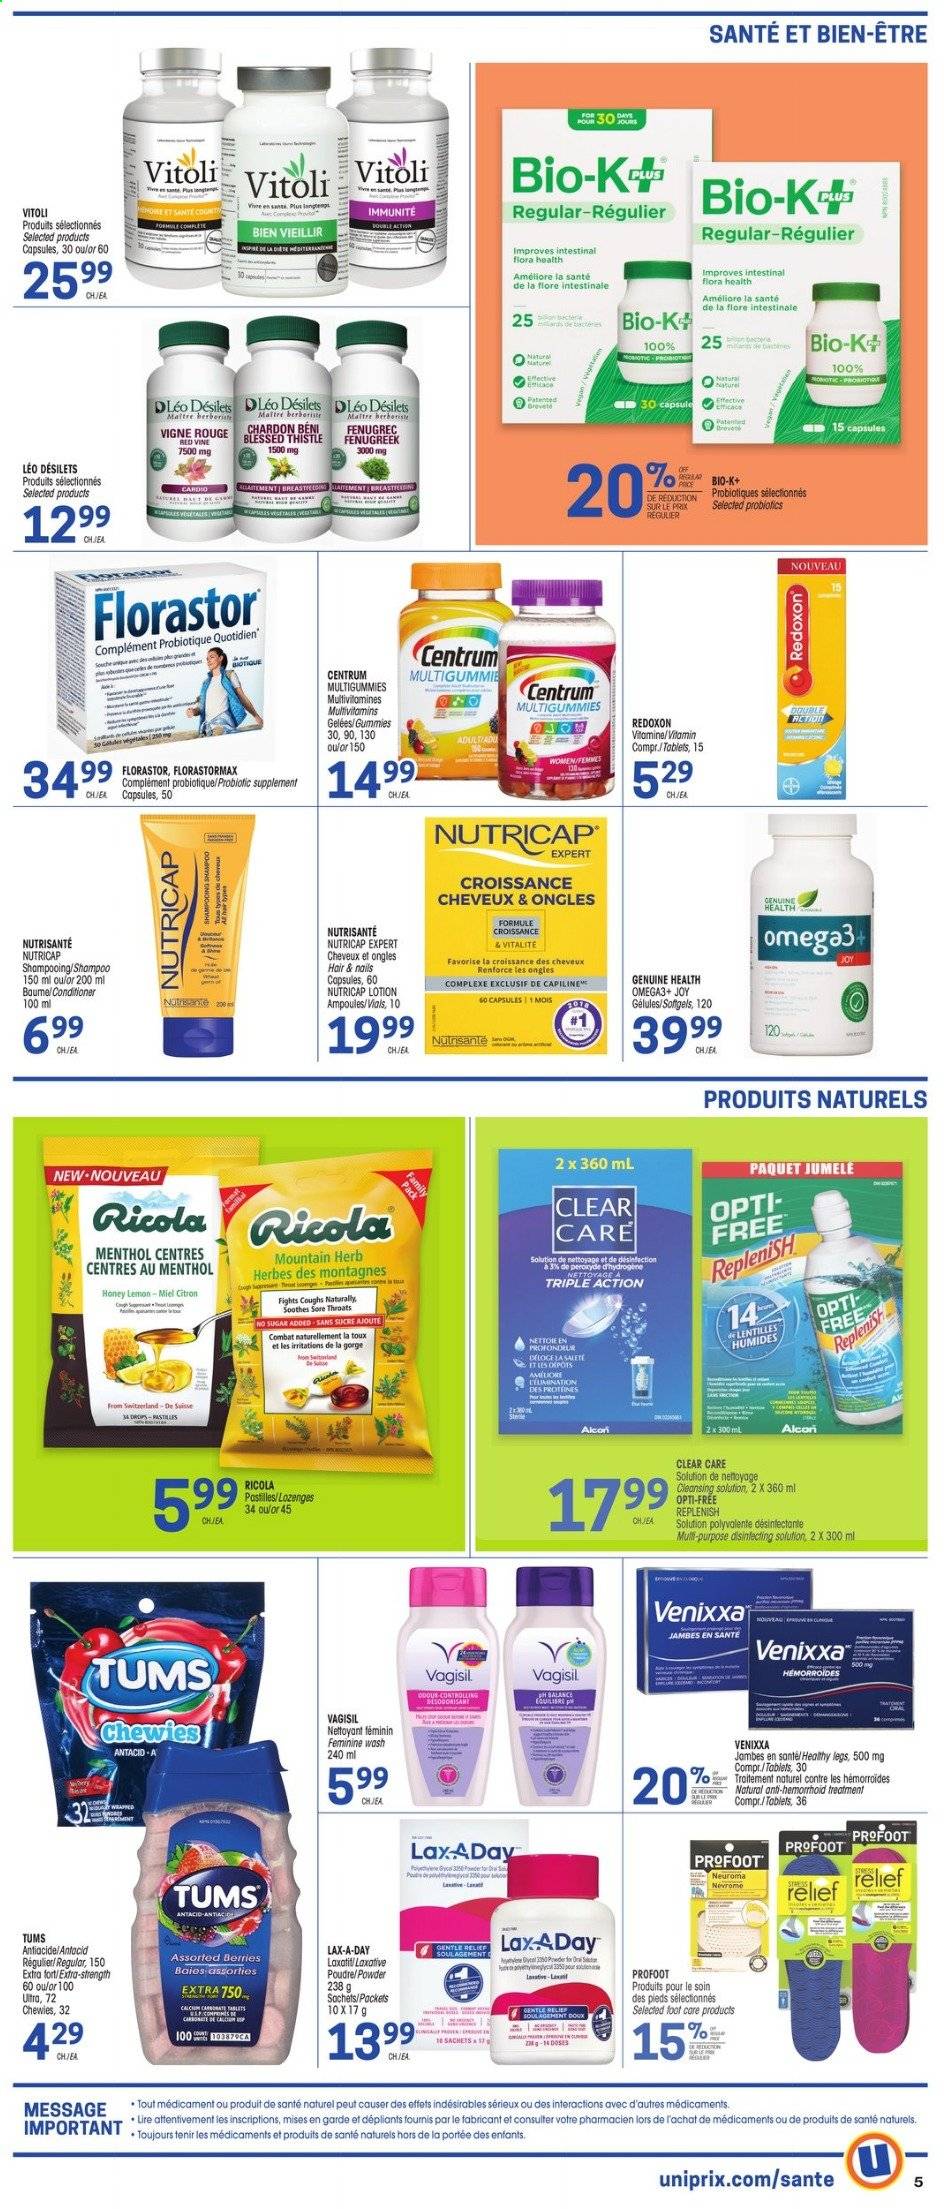 thumbnail - Uniprix Flyer - January 14, 2021 - January 20, 2021 - Sales products - Ricola, pastilles, herbs, honey, Joy, conditioner, body lotion, foot care, Clear Care, multivitamin, probiotics, Antacid, laxative, Centrum, shampoo, desinfection. Page 4.